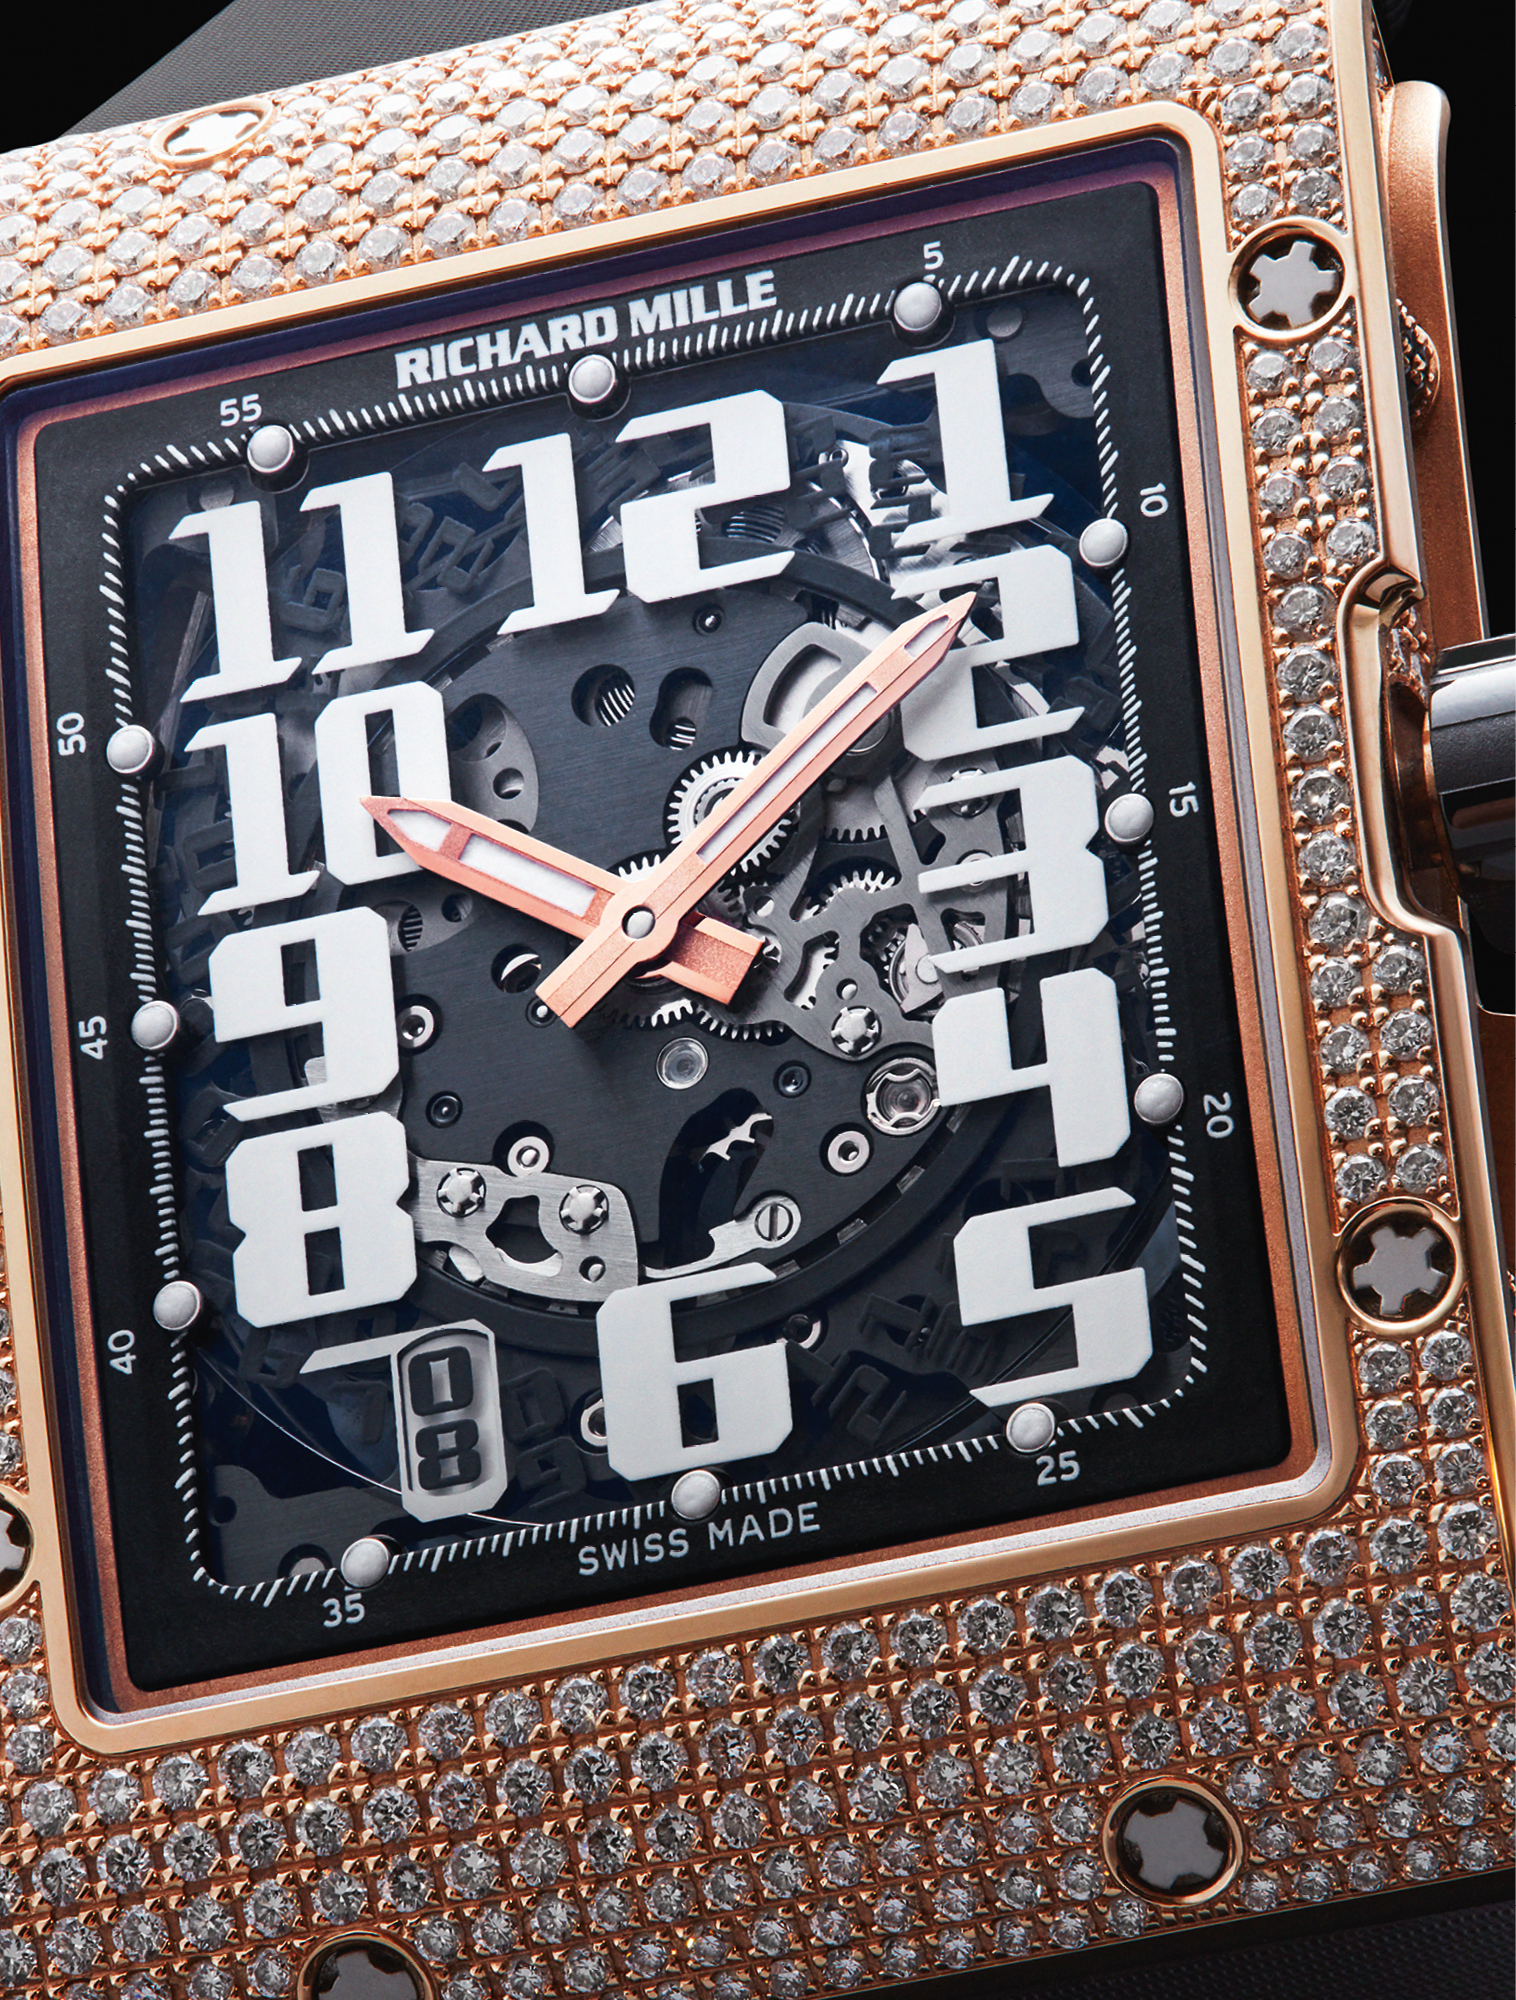 The Richard Mille RM016 Automatic Winding Extra Flat 18ct Red Gold model with diamonds allows the rewinding of the mainspring to be adapted most effectively to the user’s activity levels. £171,000, RICHARD MILLE